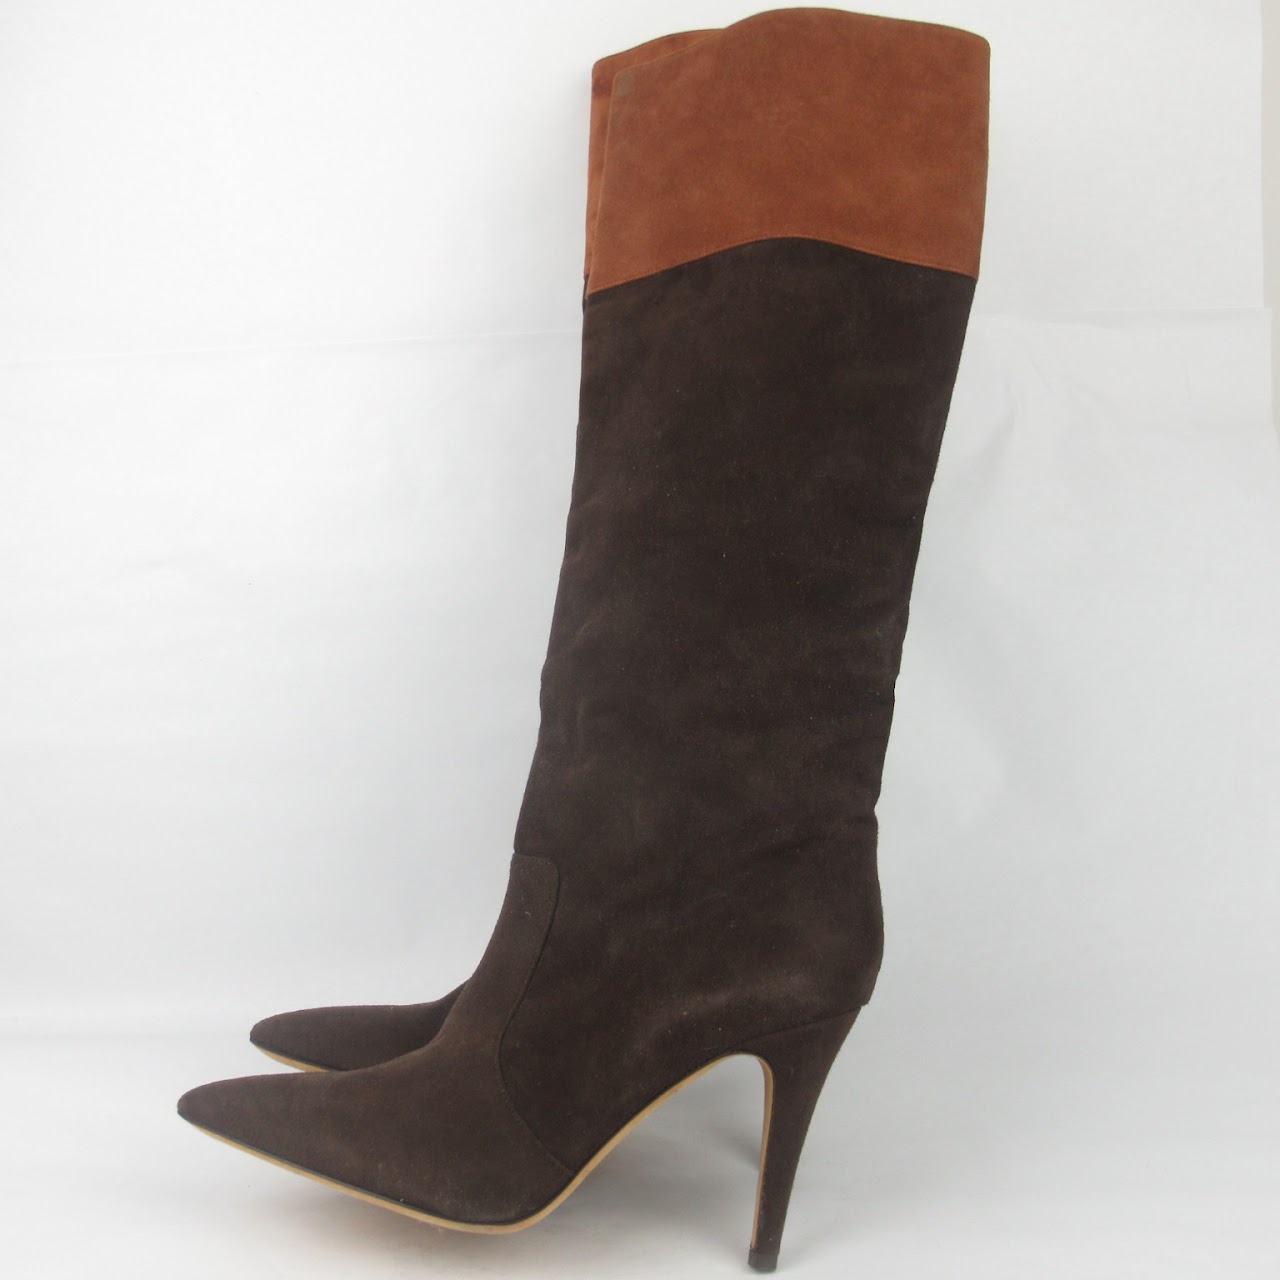 Kate Spade Suede Leather Calf Boots